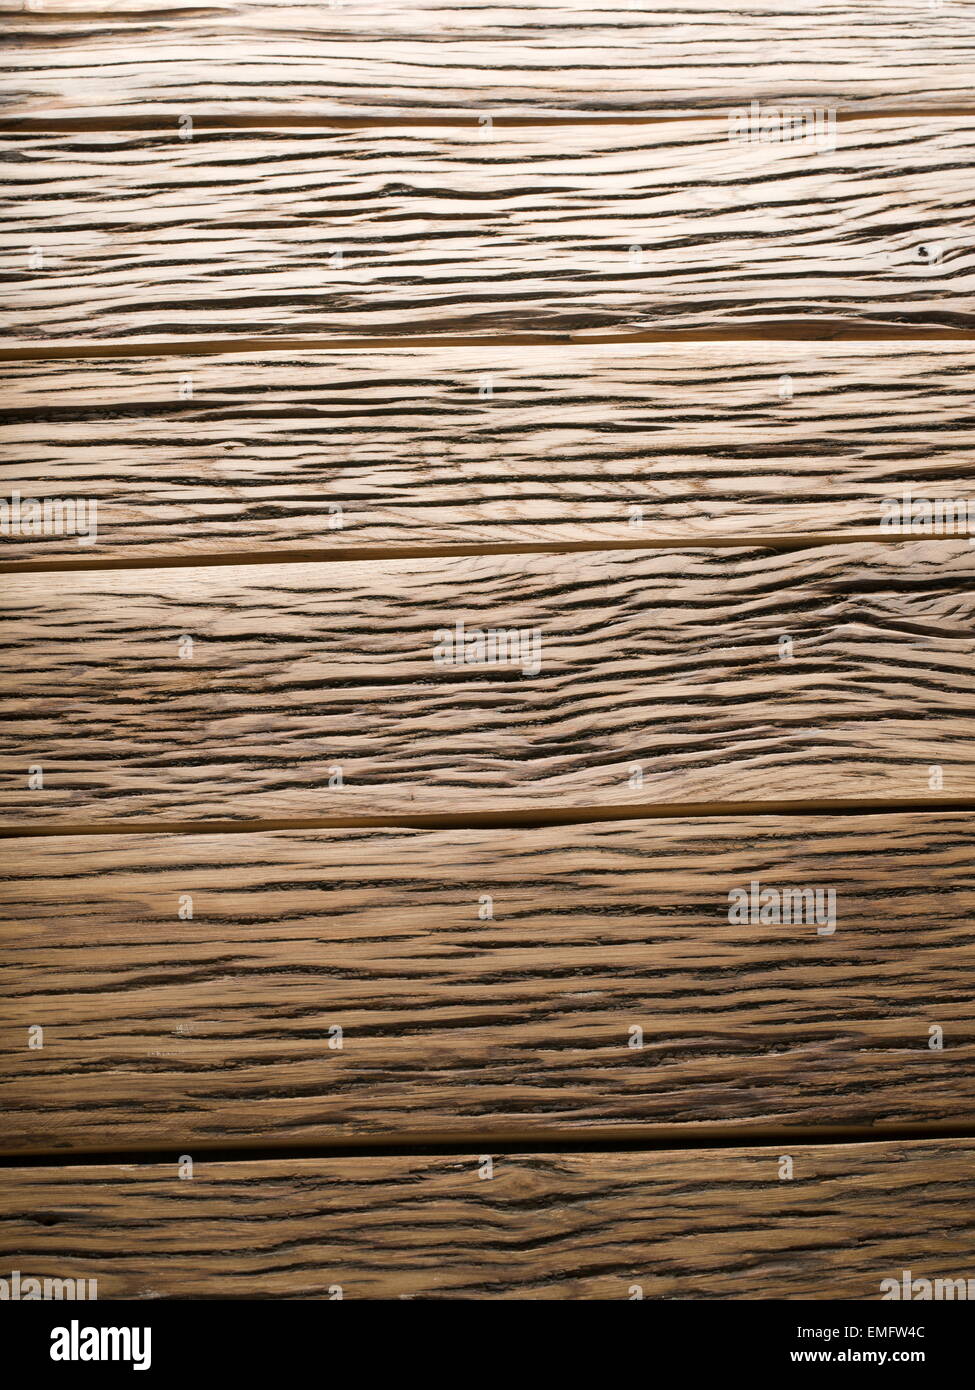 An old brown wooden background. Stock Photo